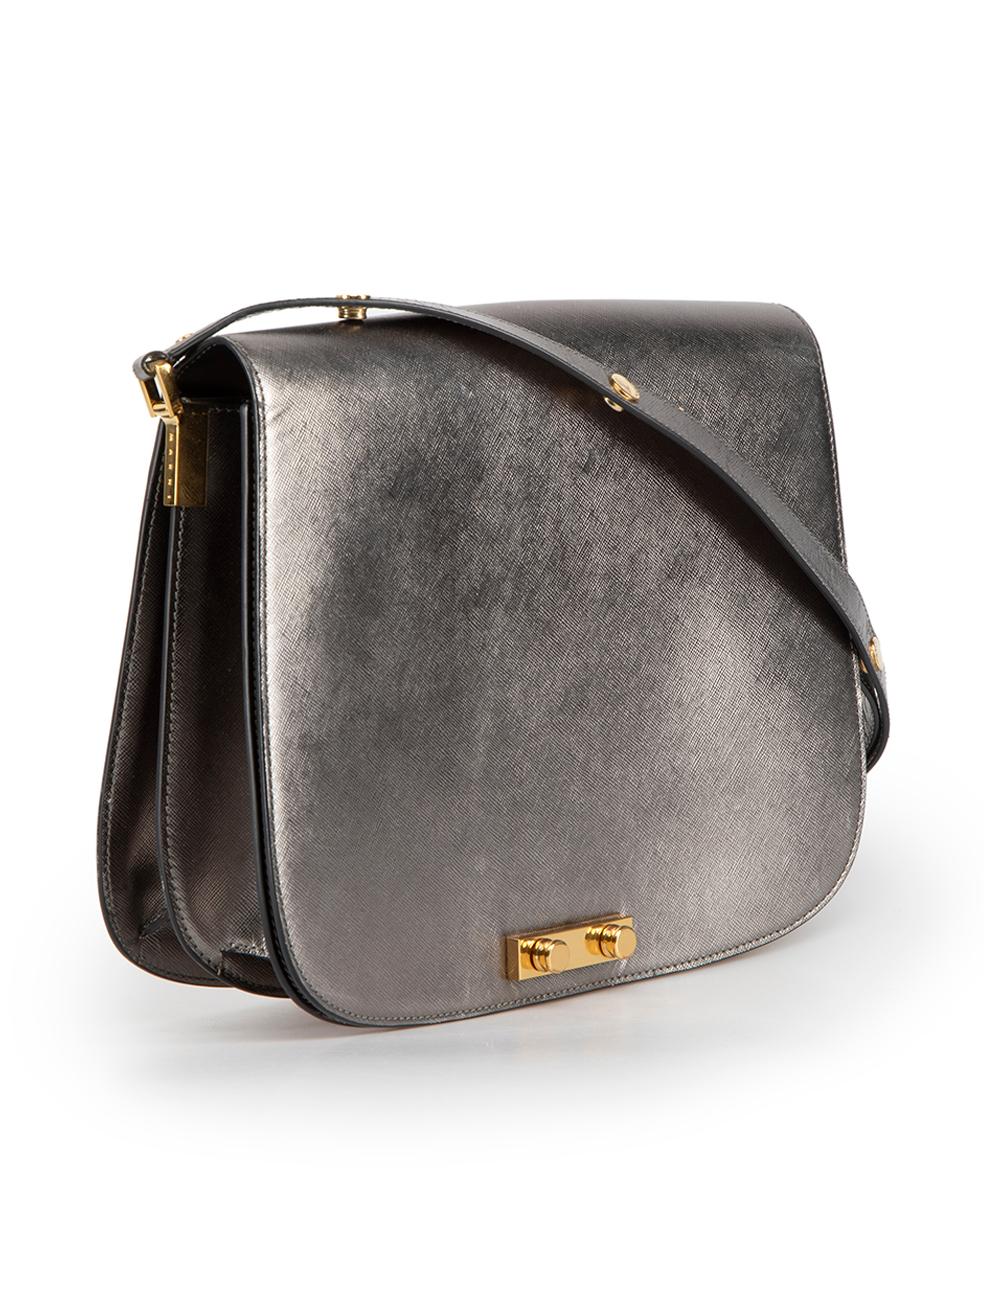 CONDITION is Good. Minor wear to handbag is evident. Light wear to overall leather with creasing to handle and minor indentations on front and back of bag on this used Marni designer resale item.
 
Details
Gunmetal
Leather
Large shoulder bag
1x Snap